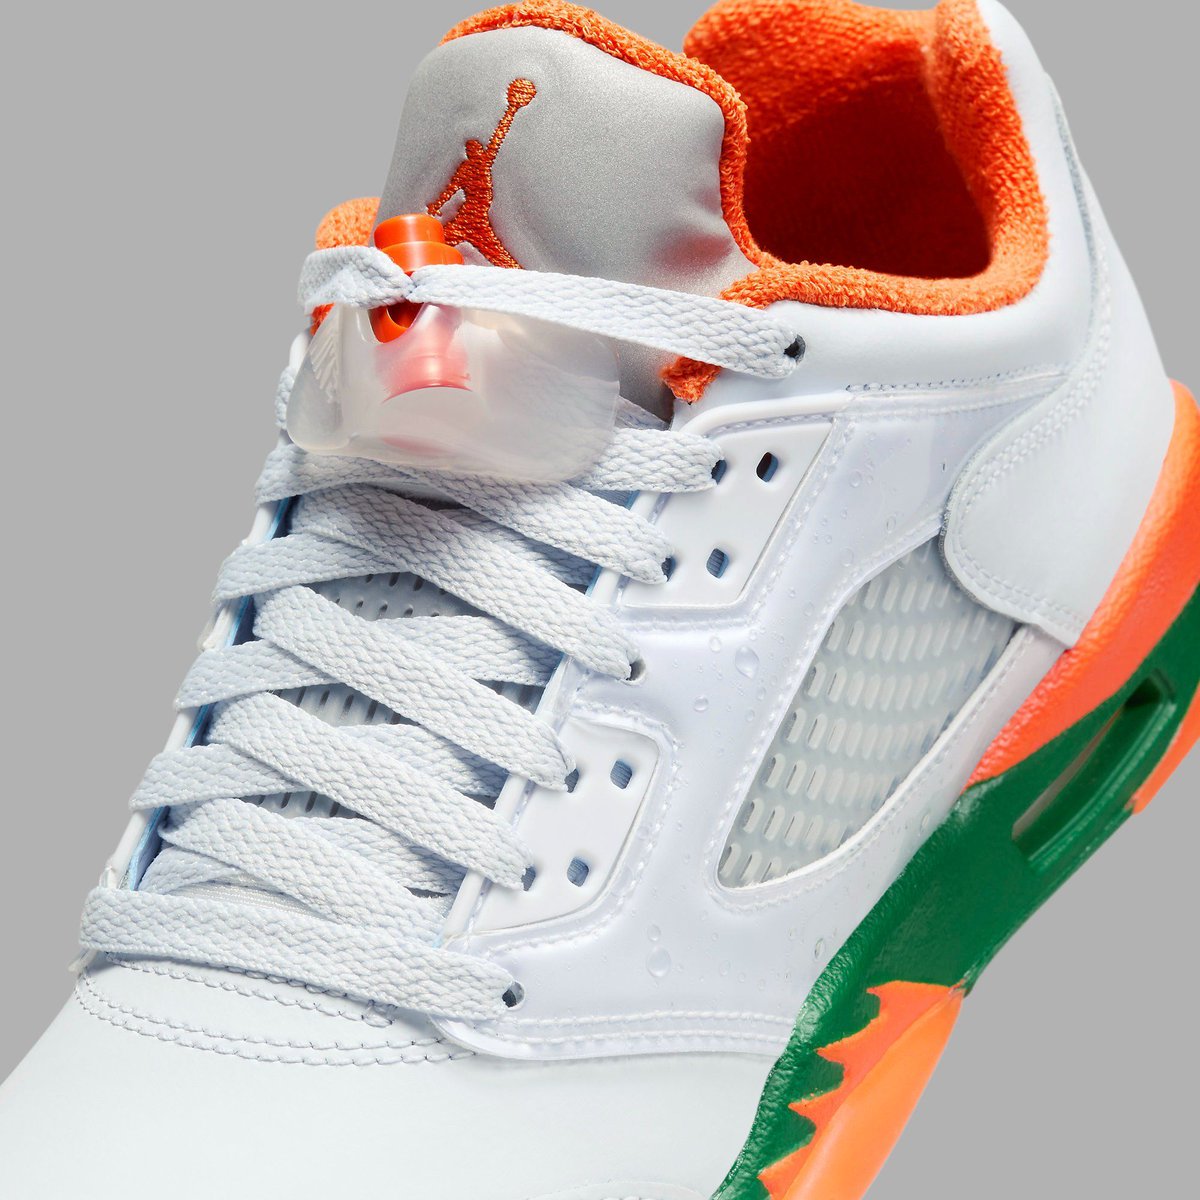 Official Look at a new Air Jordan 5 Low 'Miami Hurricanes' 🌪 bit.ly/3wEjOlU